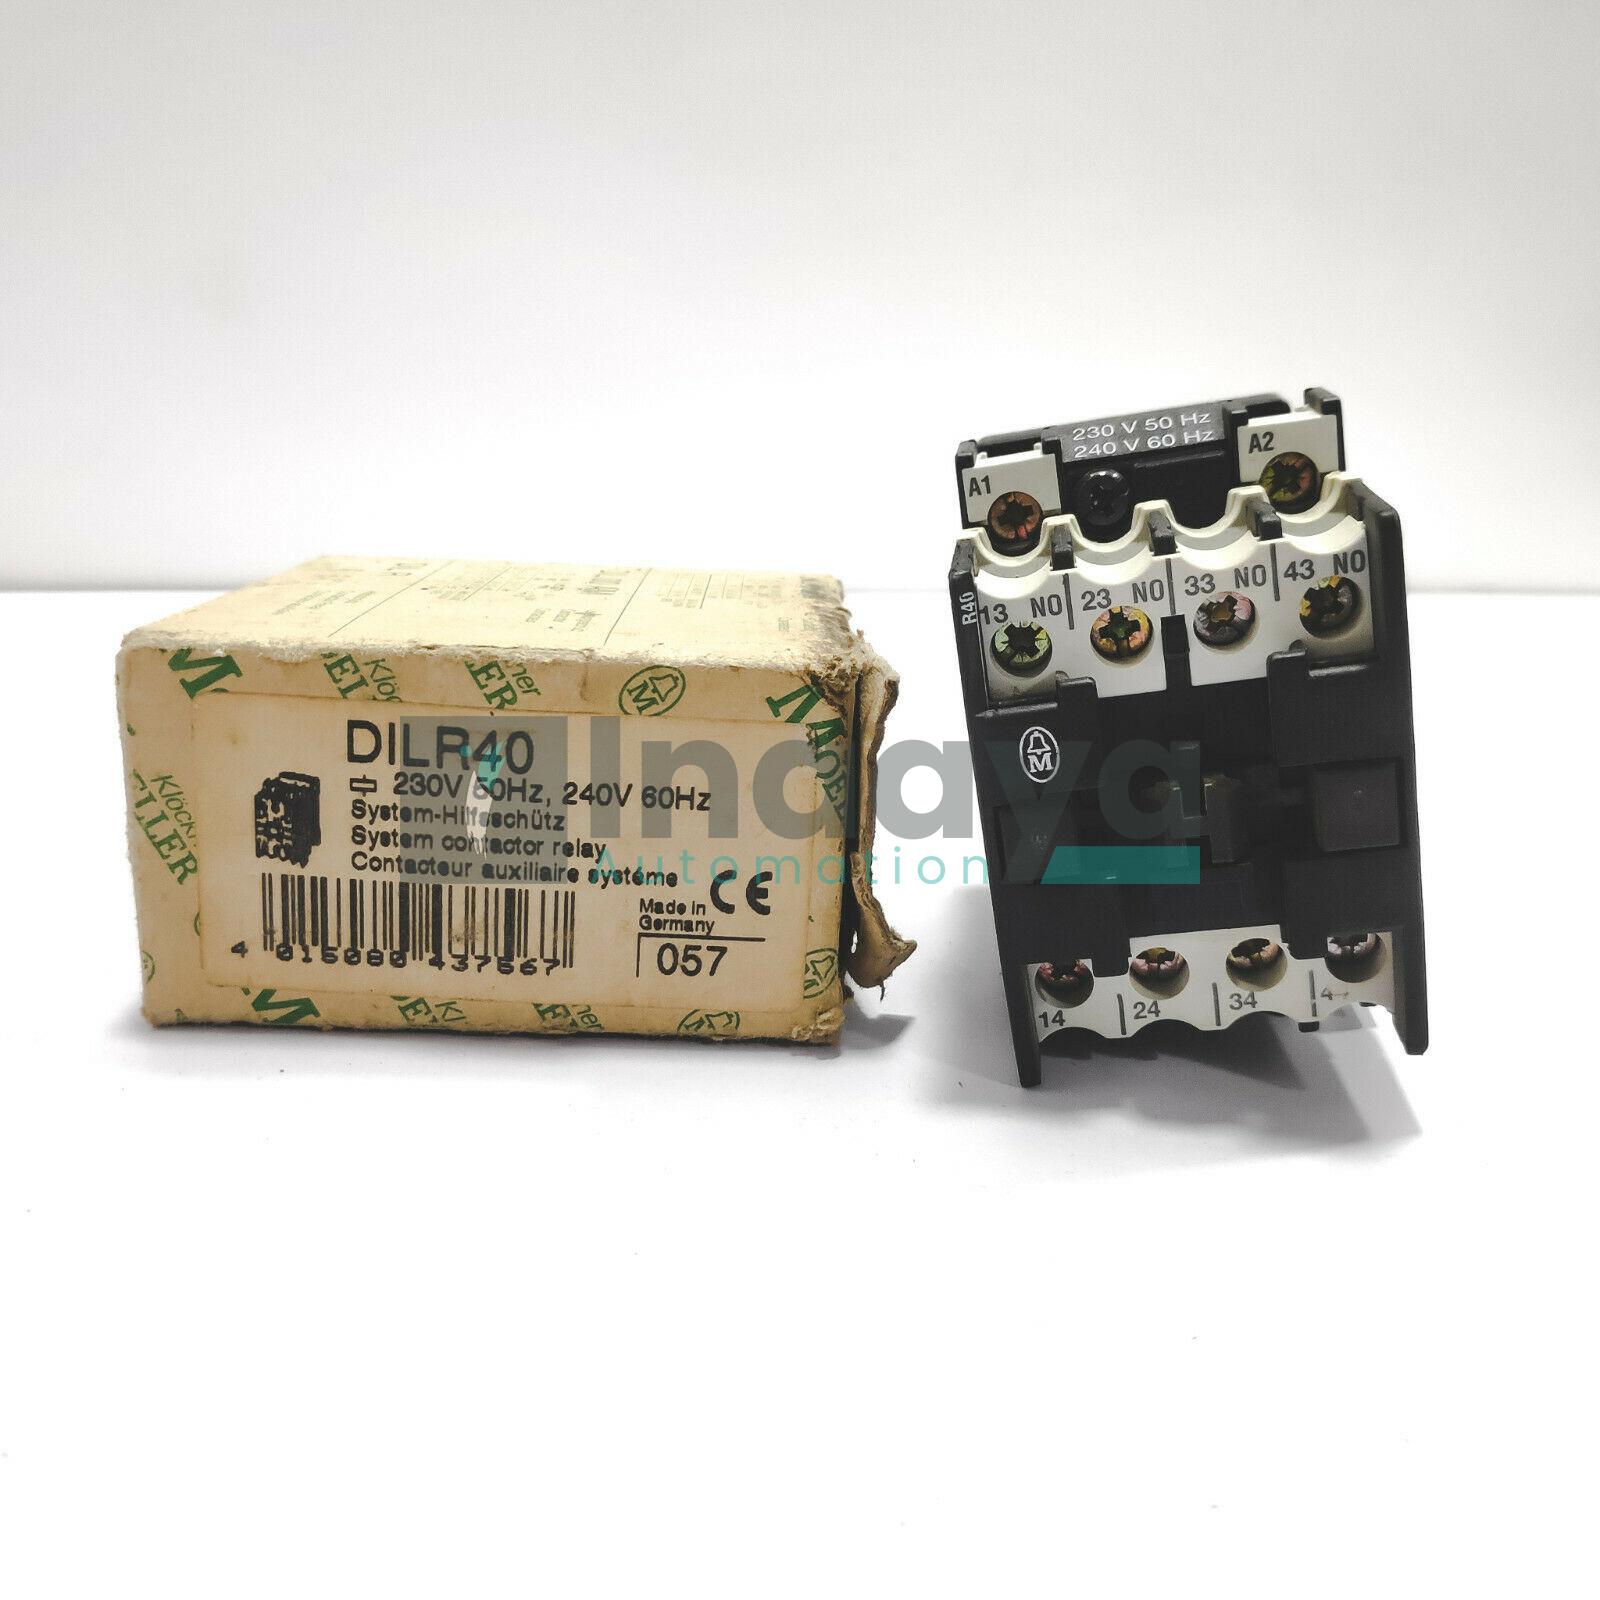 MOELLER DILR-40 16A AUXILIARY CONTACTOR